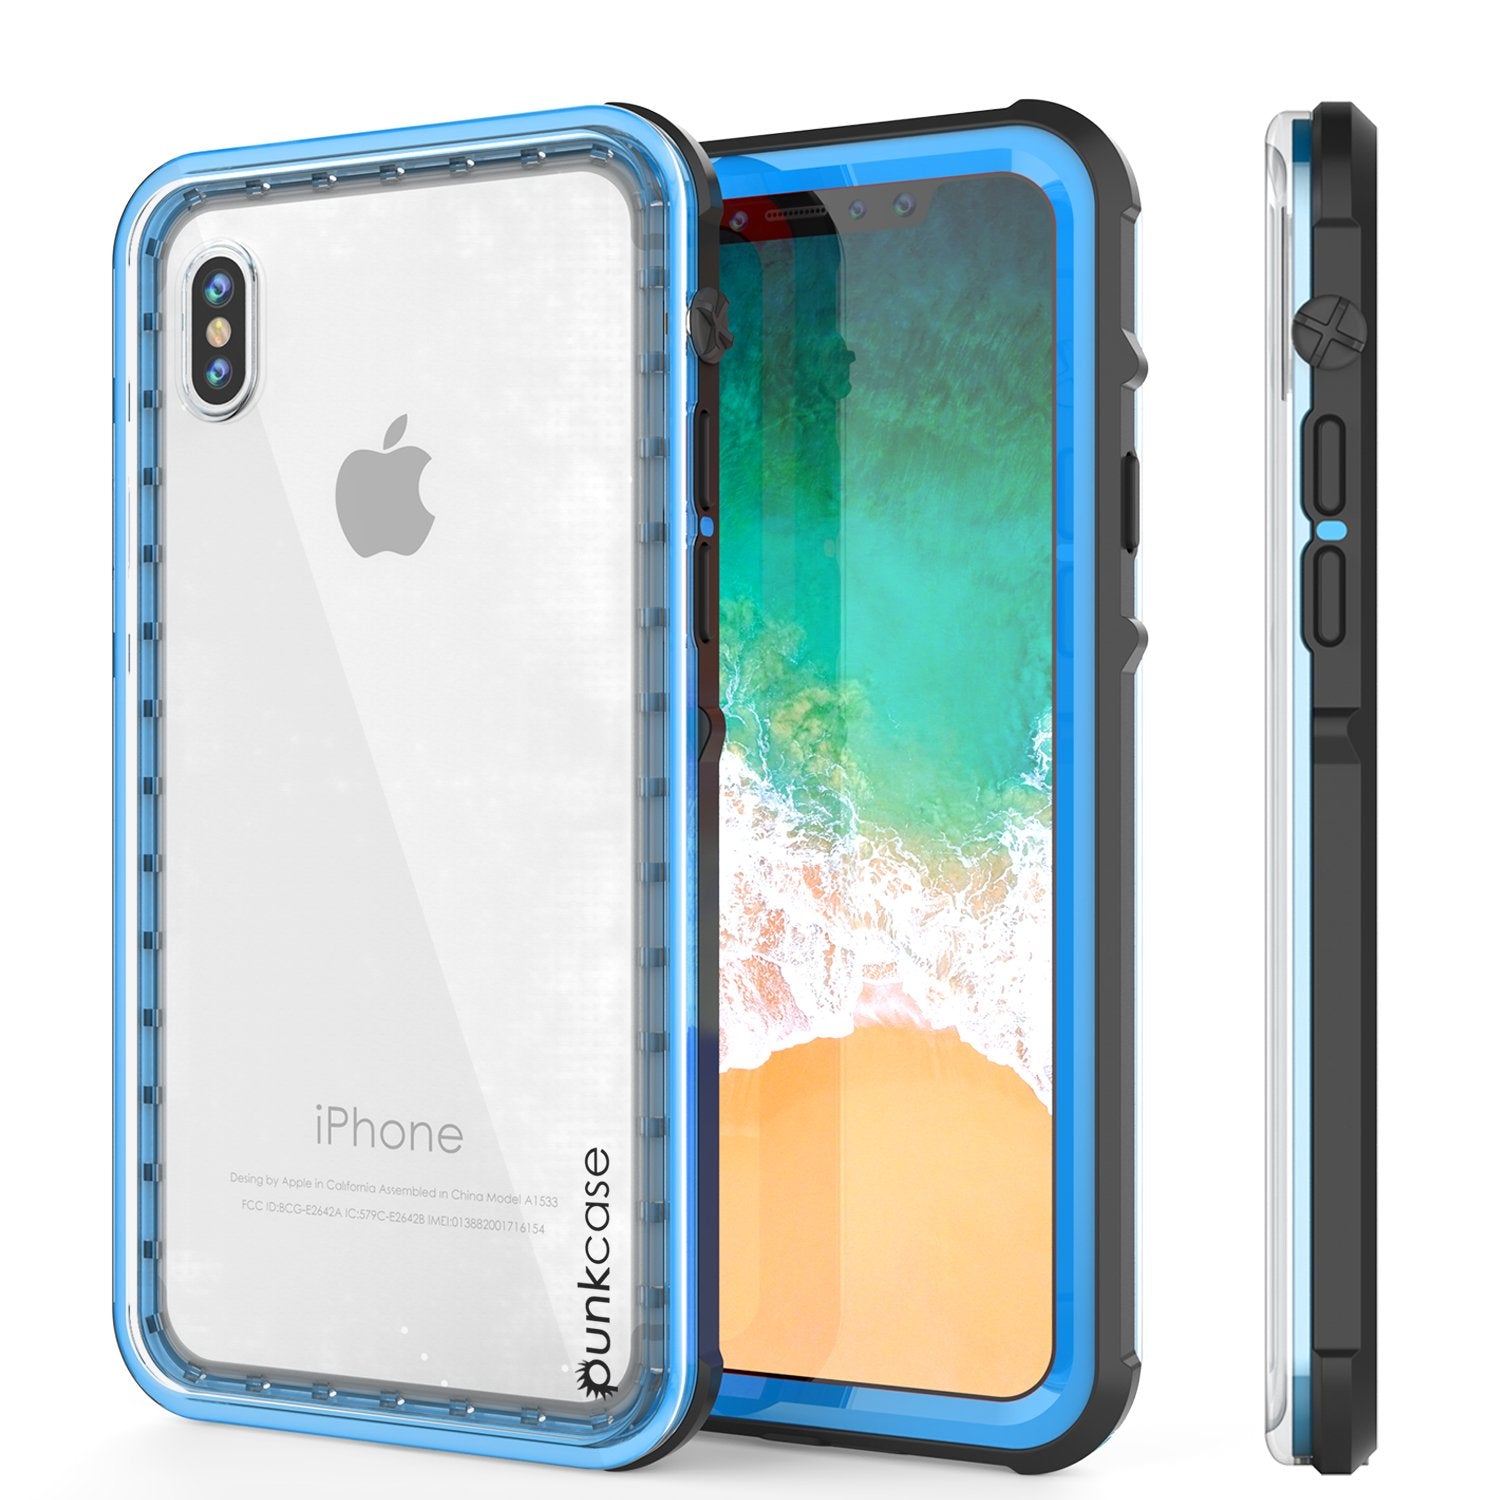 iPhone X Case, PUNKCase [CRYSTAL SERIES] Protective IP68 Certified Cover [Light Blue]